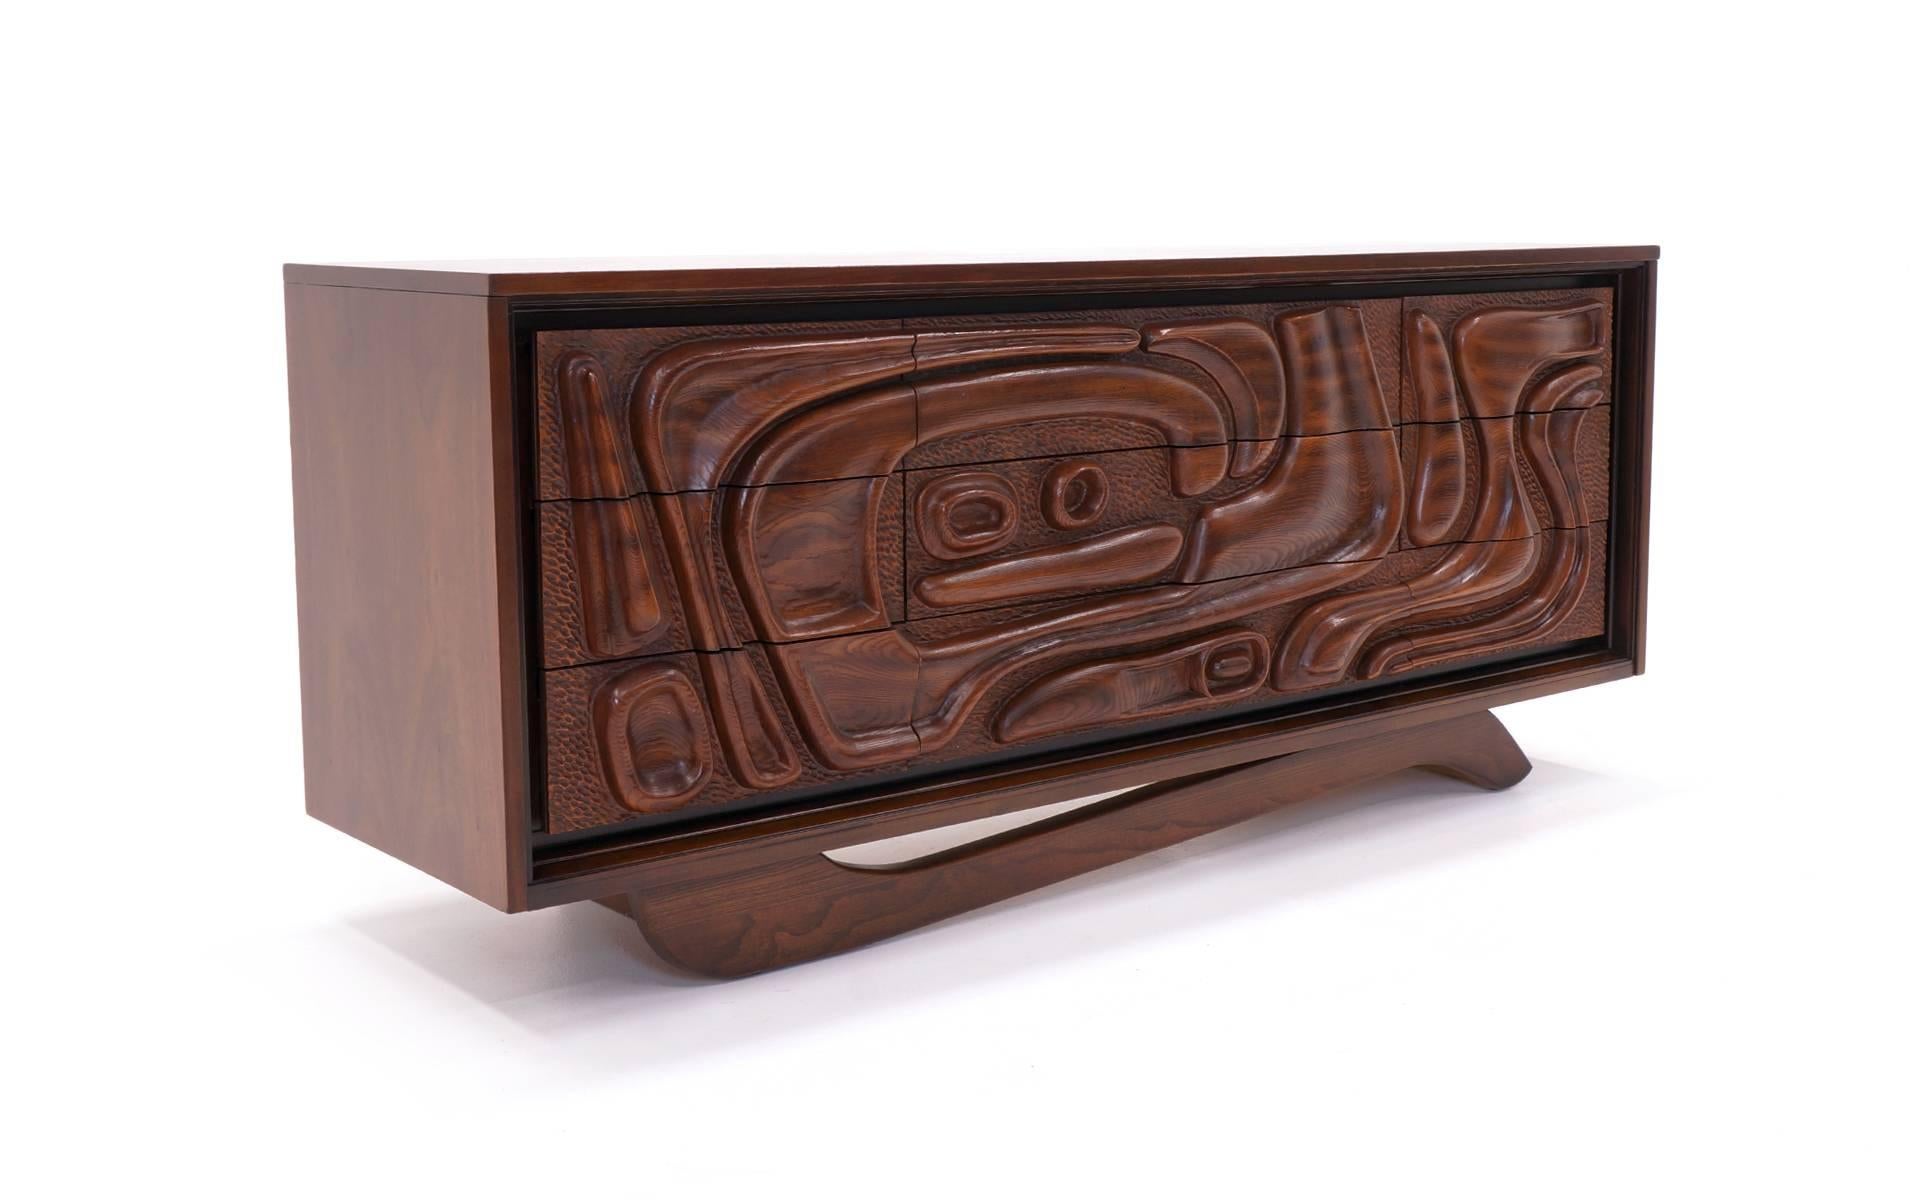 Unique organic shapes are sculpted into the nine drawers of this striking walnut cabinet / credenza / dresser.  This design is by Pulaski Furniture Corporation.   By the way, this is the exact same designed cabinet that was in Don Draper's office in